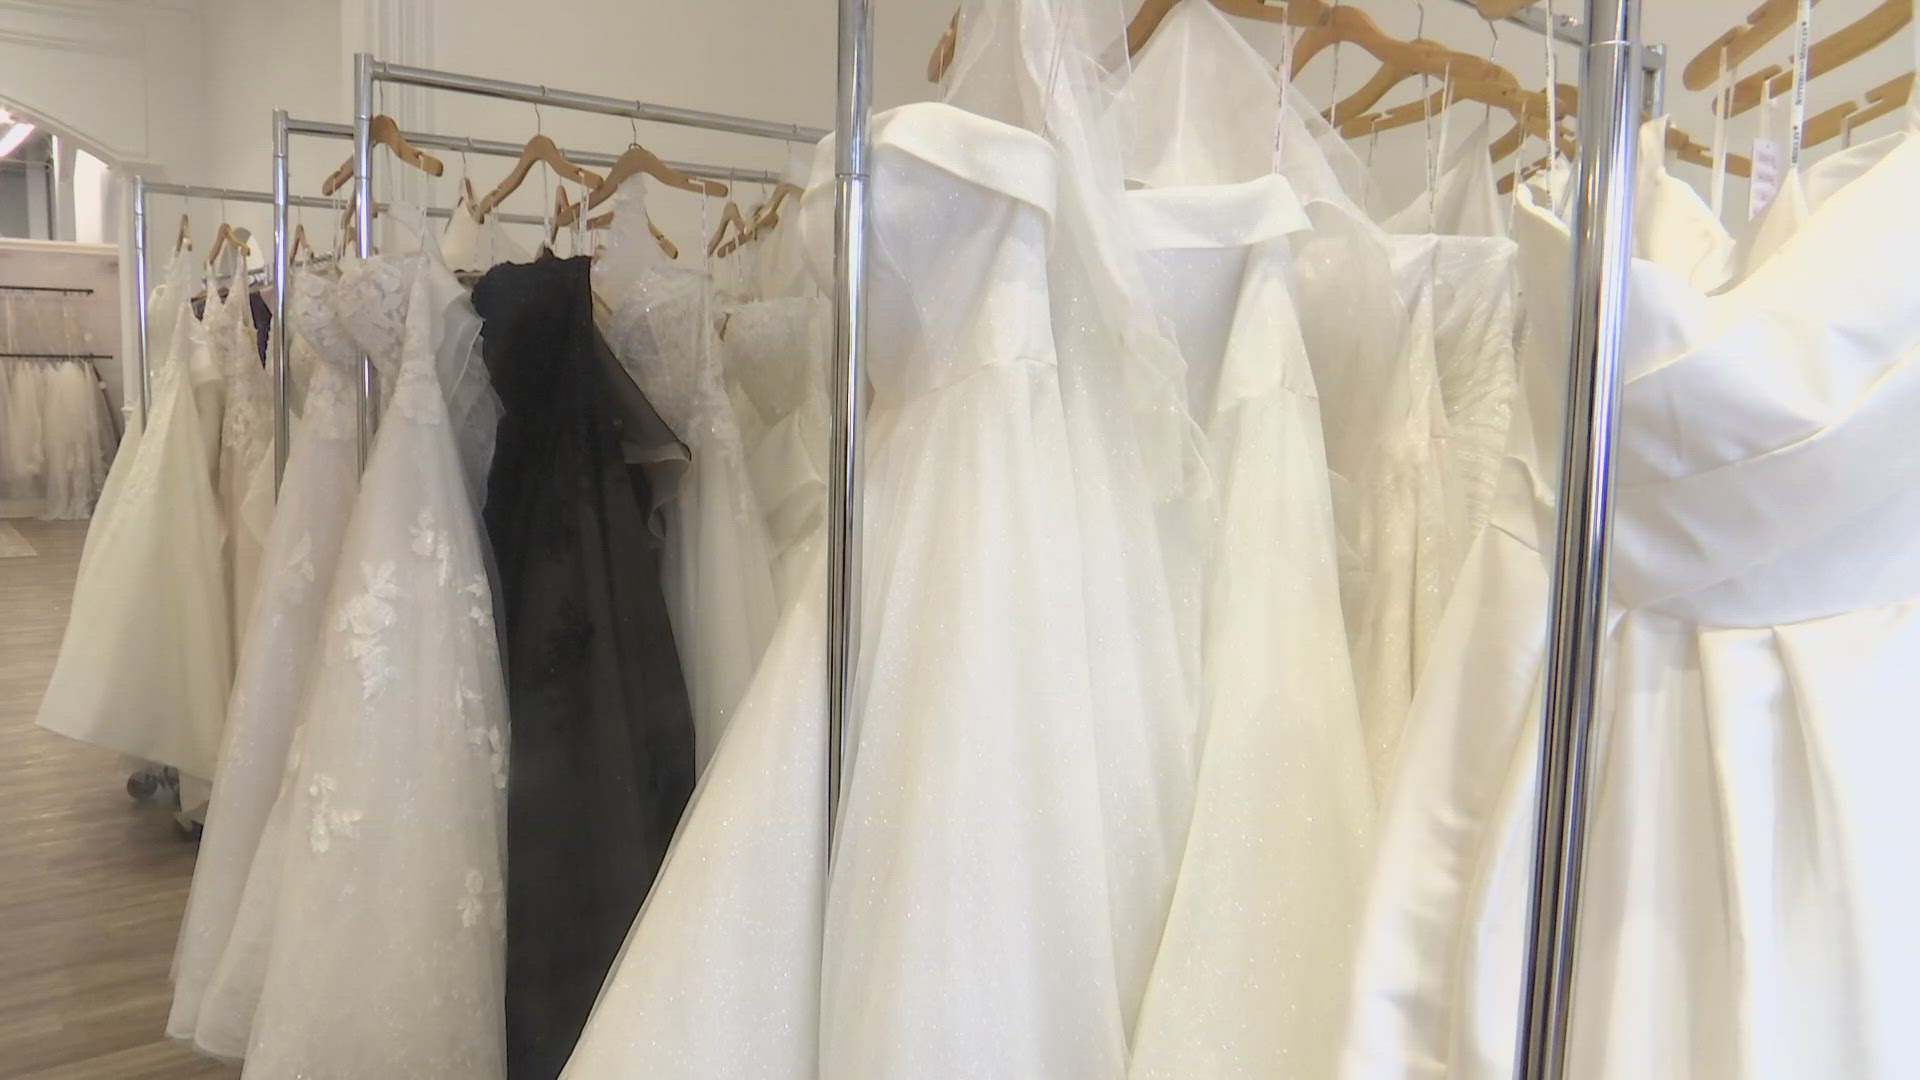 Another shop wants to make sure customers of a closed bridal store get some help.